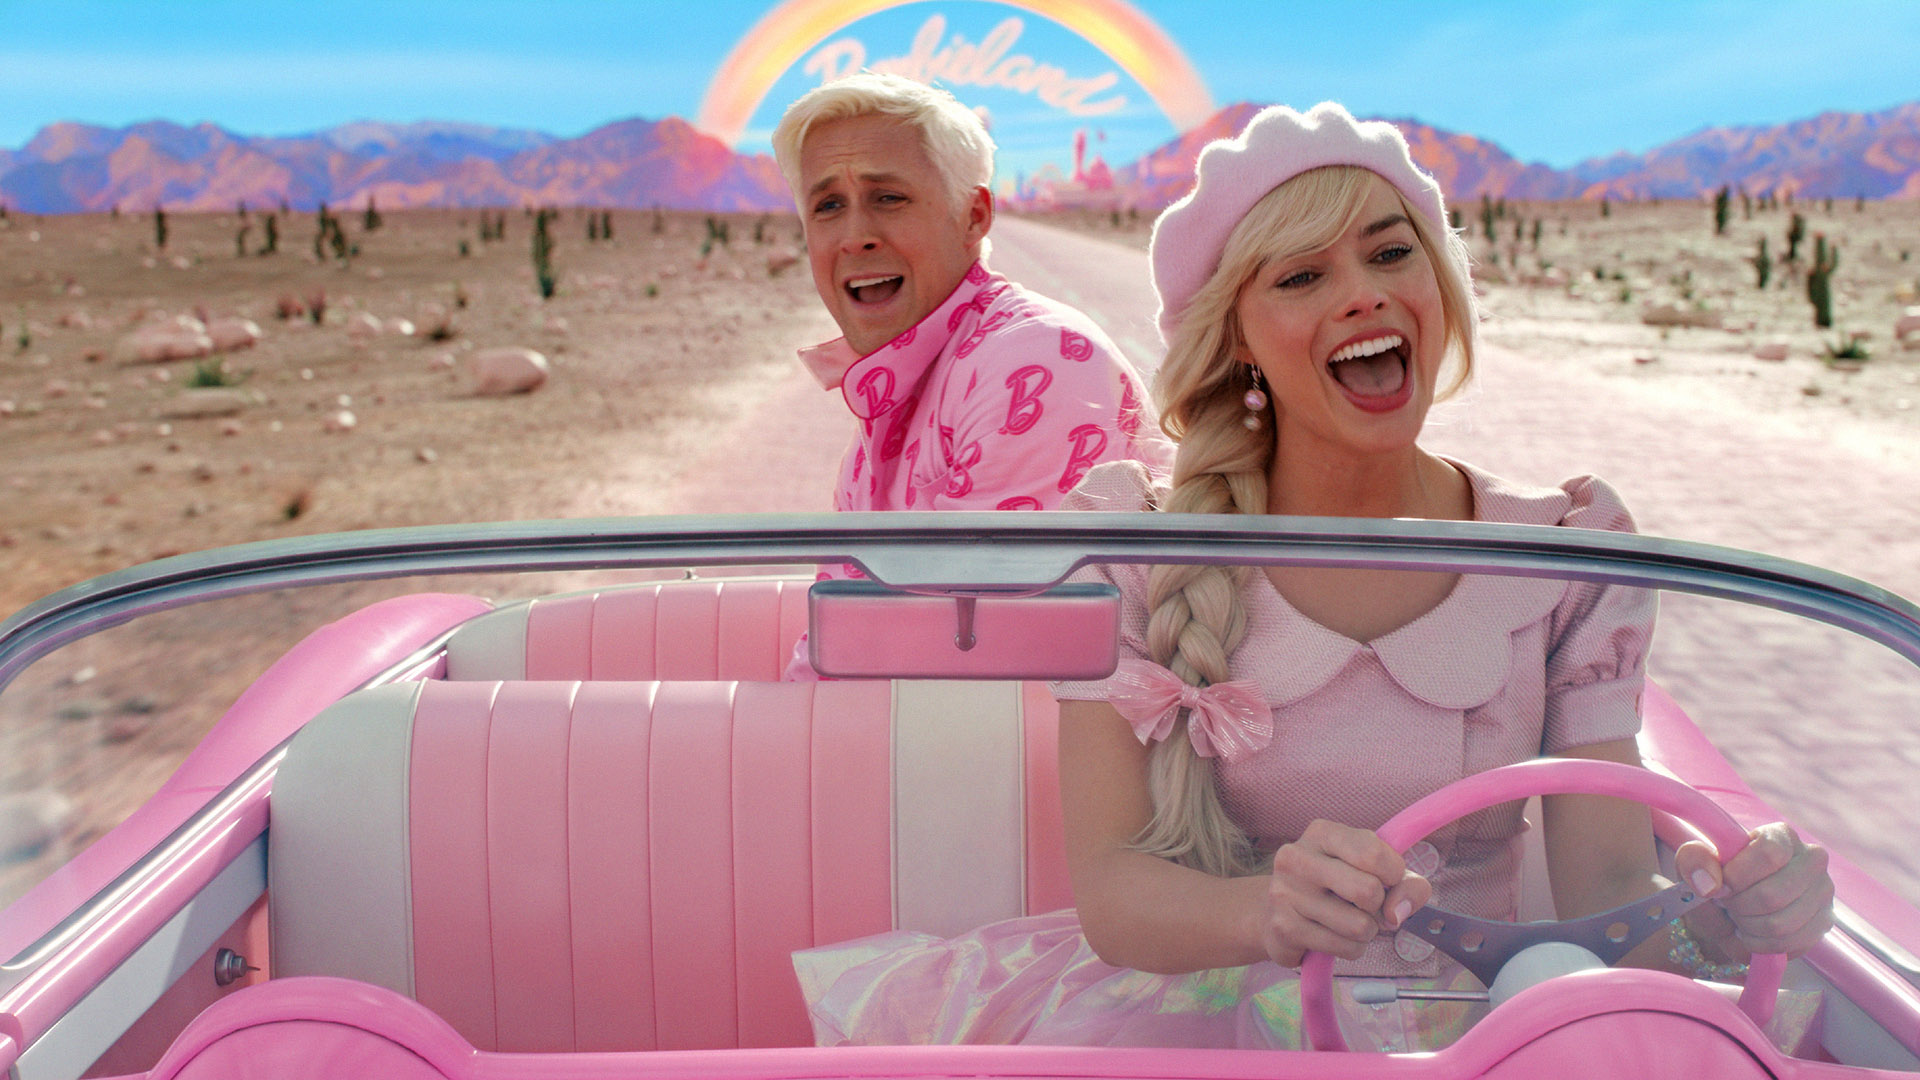 5 Songs From the Barbie Soundtrack You'll Be Listening to This Summer